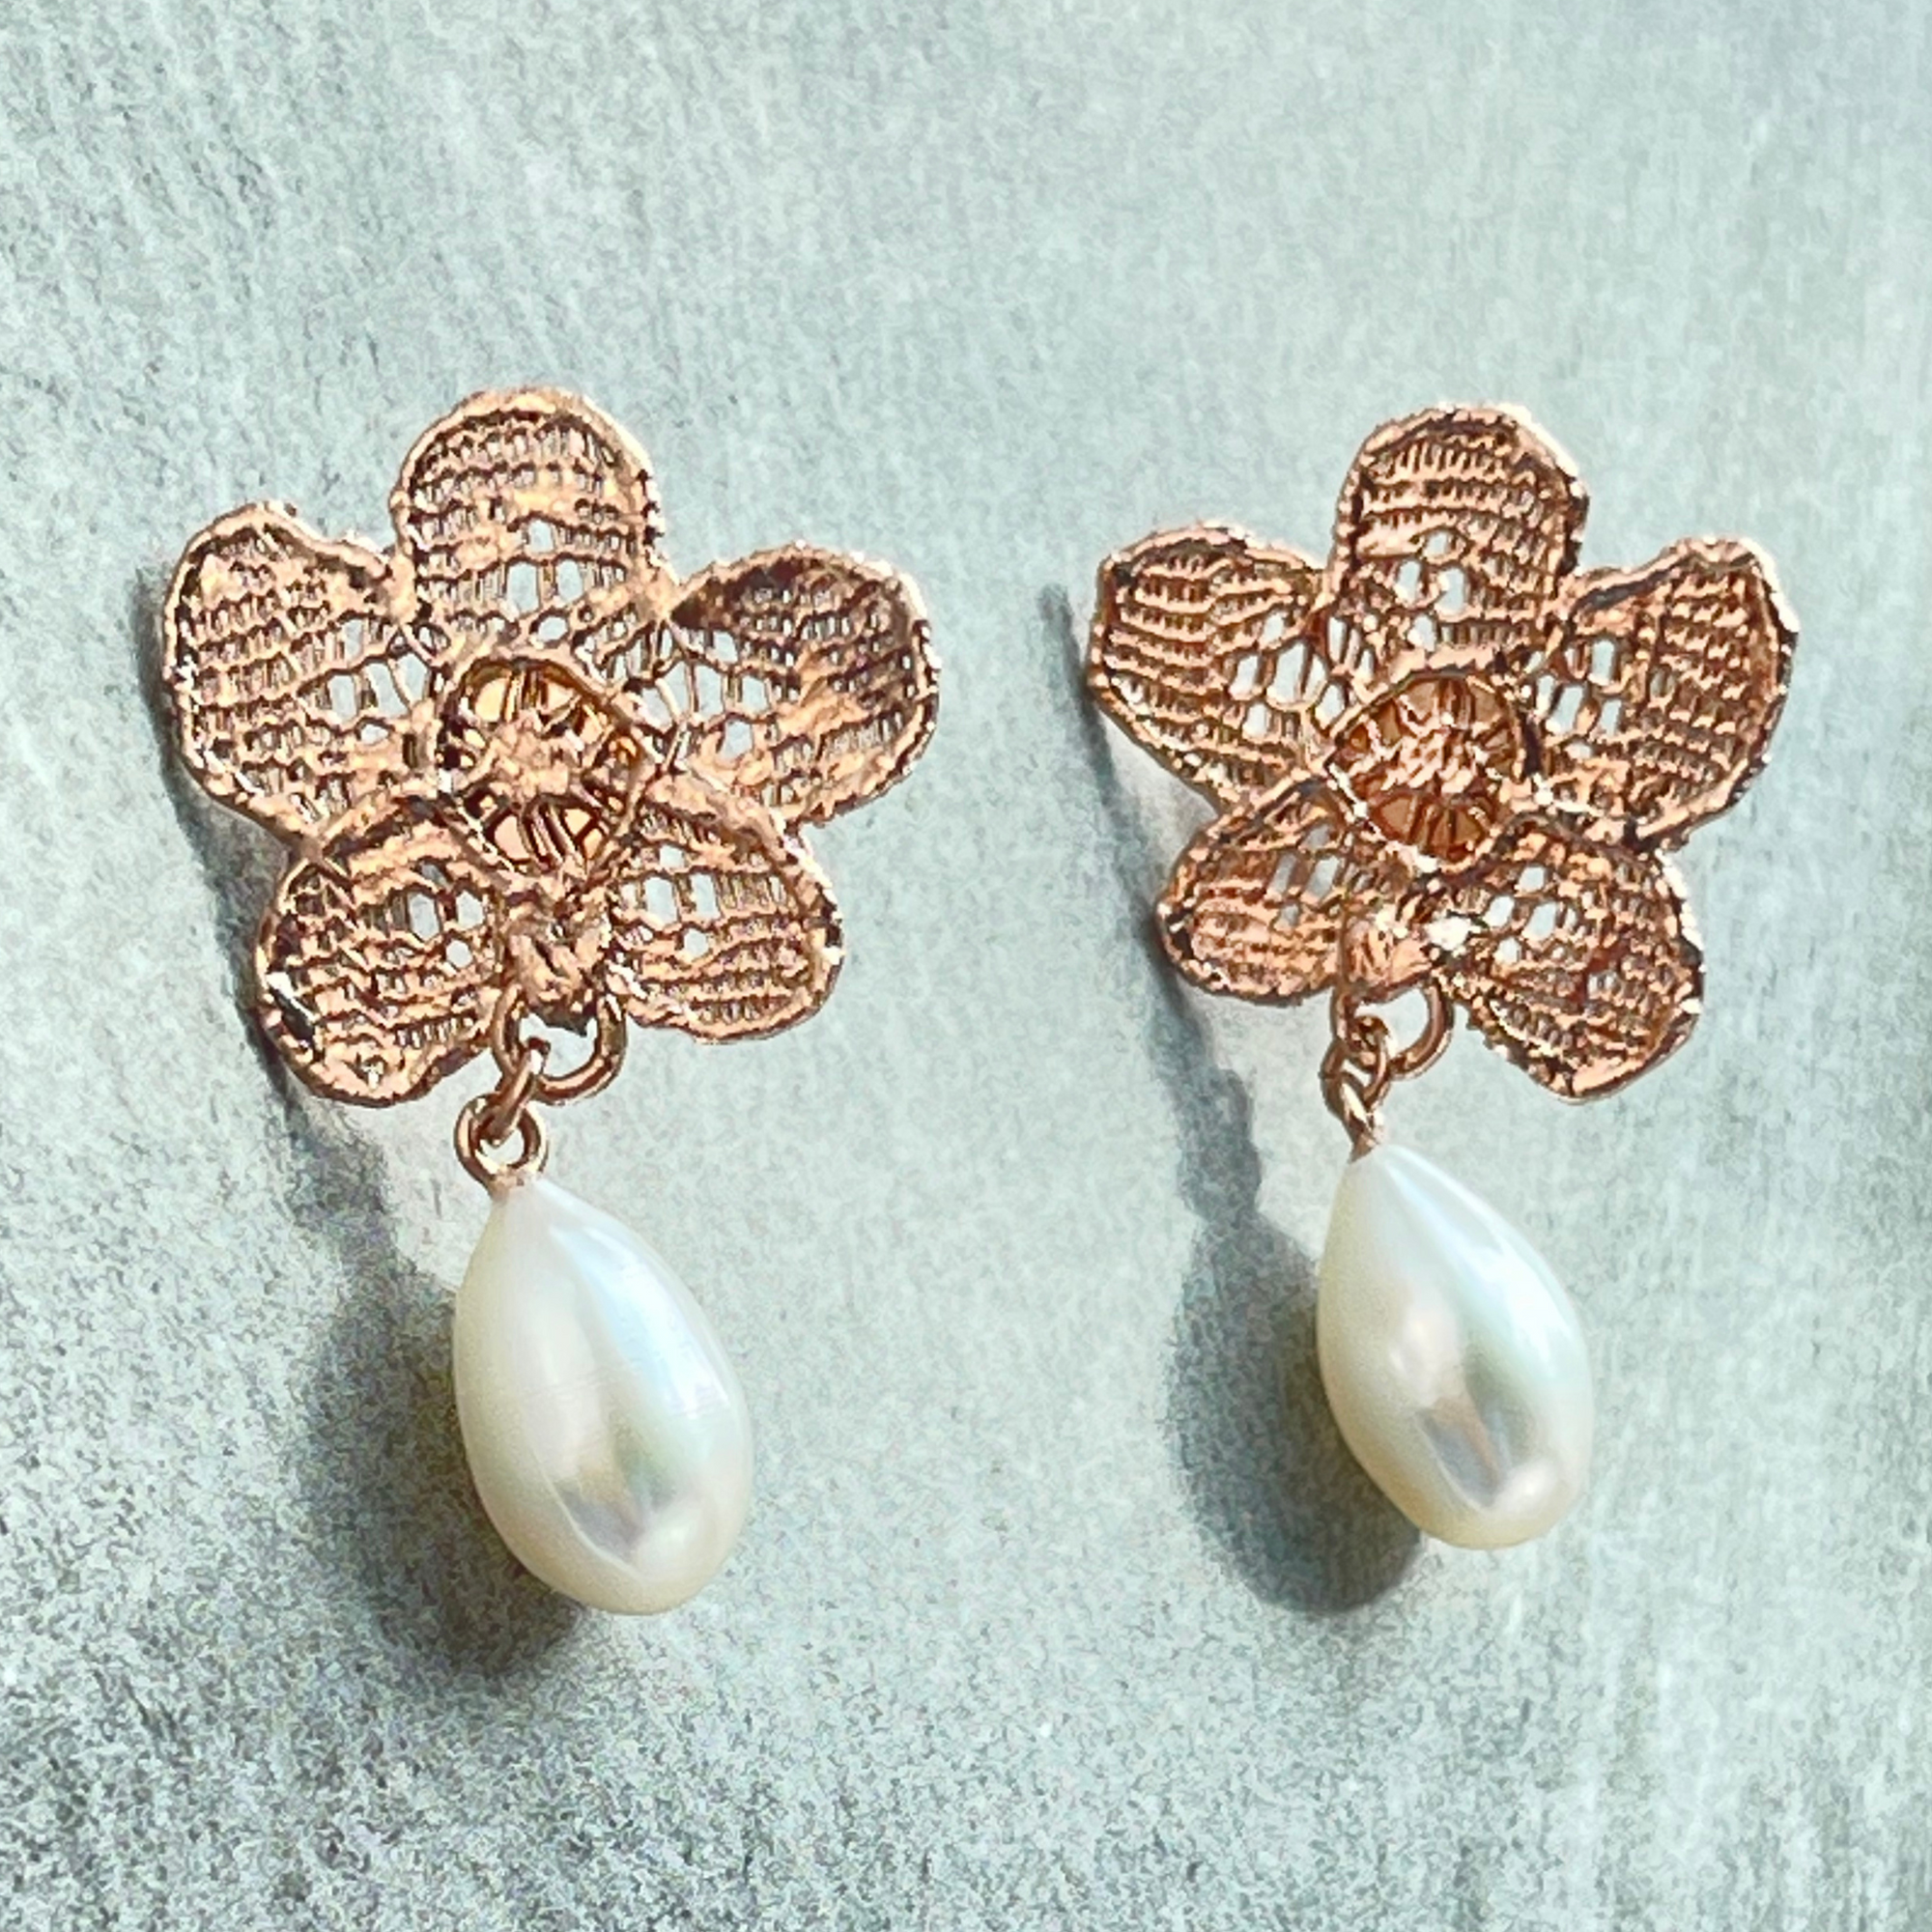 Pearl earrings with lace flower in rose gold.